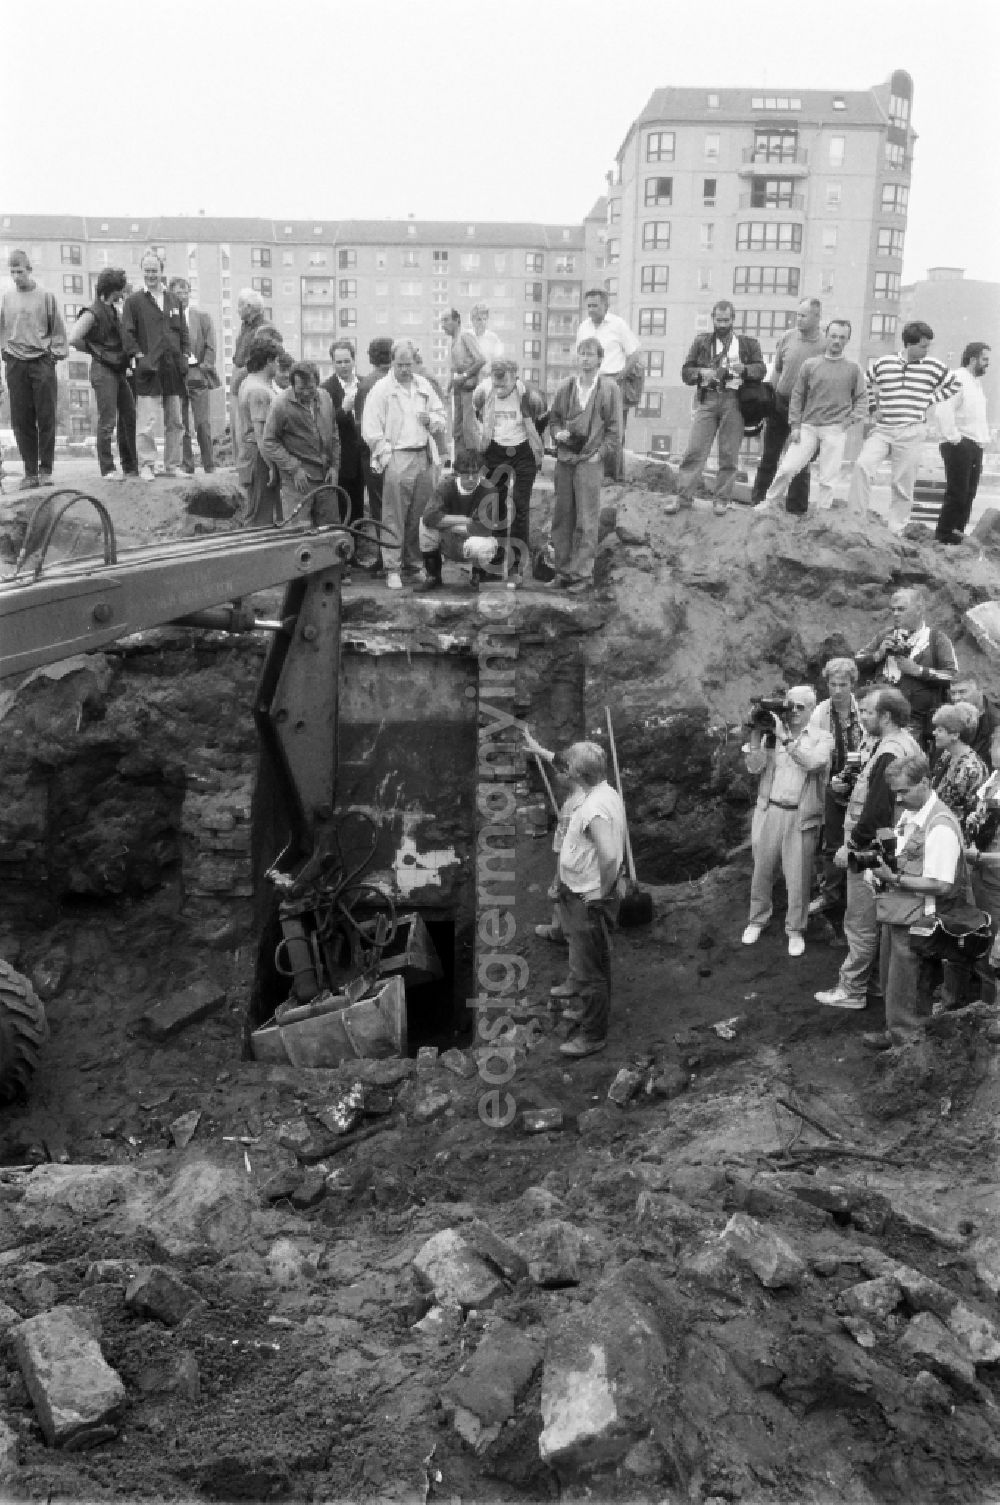 GDR image archive: Berlin - Civil engineering exposure of the fragments and remains of the concrete bunker systems Fuhrerbunker - Reichskanzlei on Vossstrasse in the district of Mitte in Berlin East Berlin in the area of the former GDR, German Democratic Republic